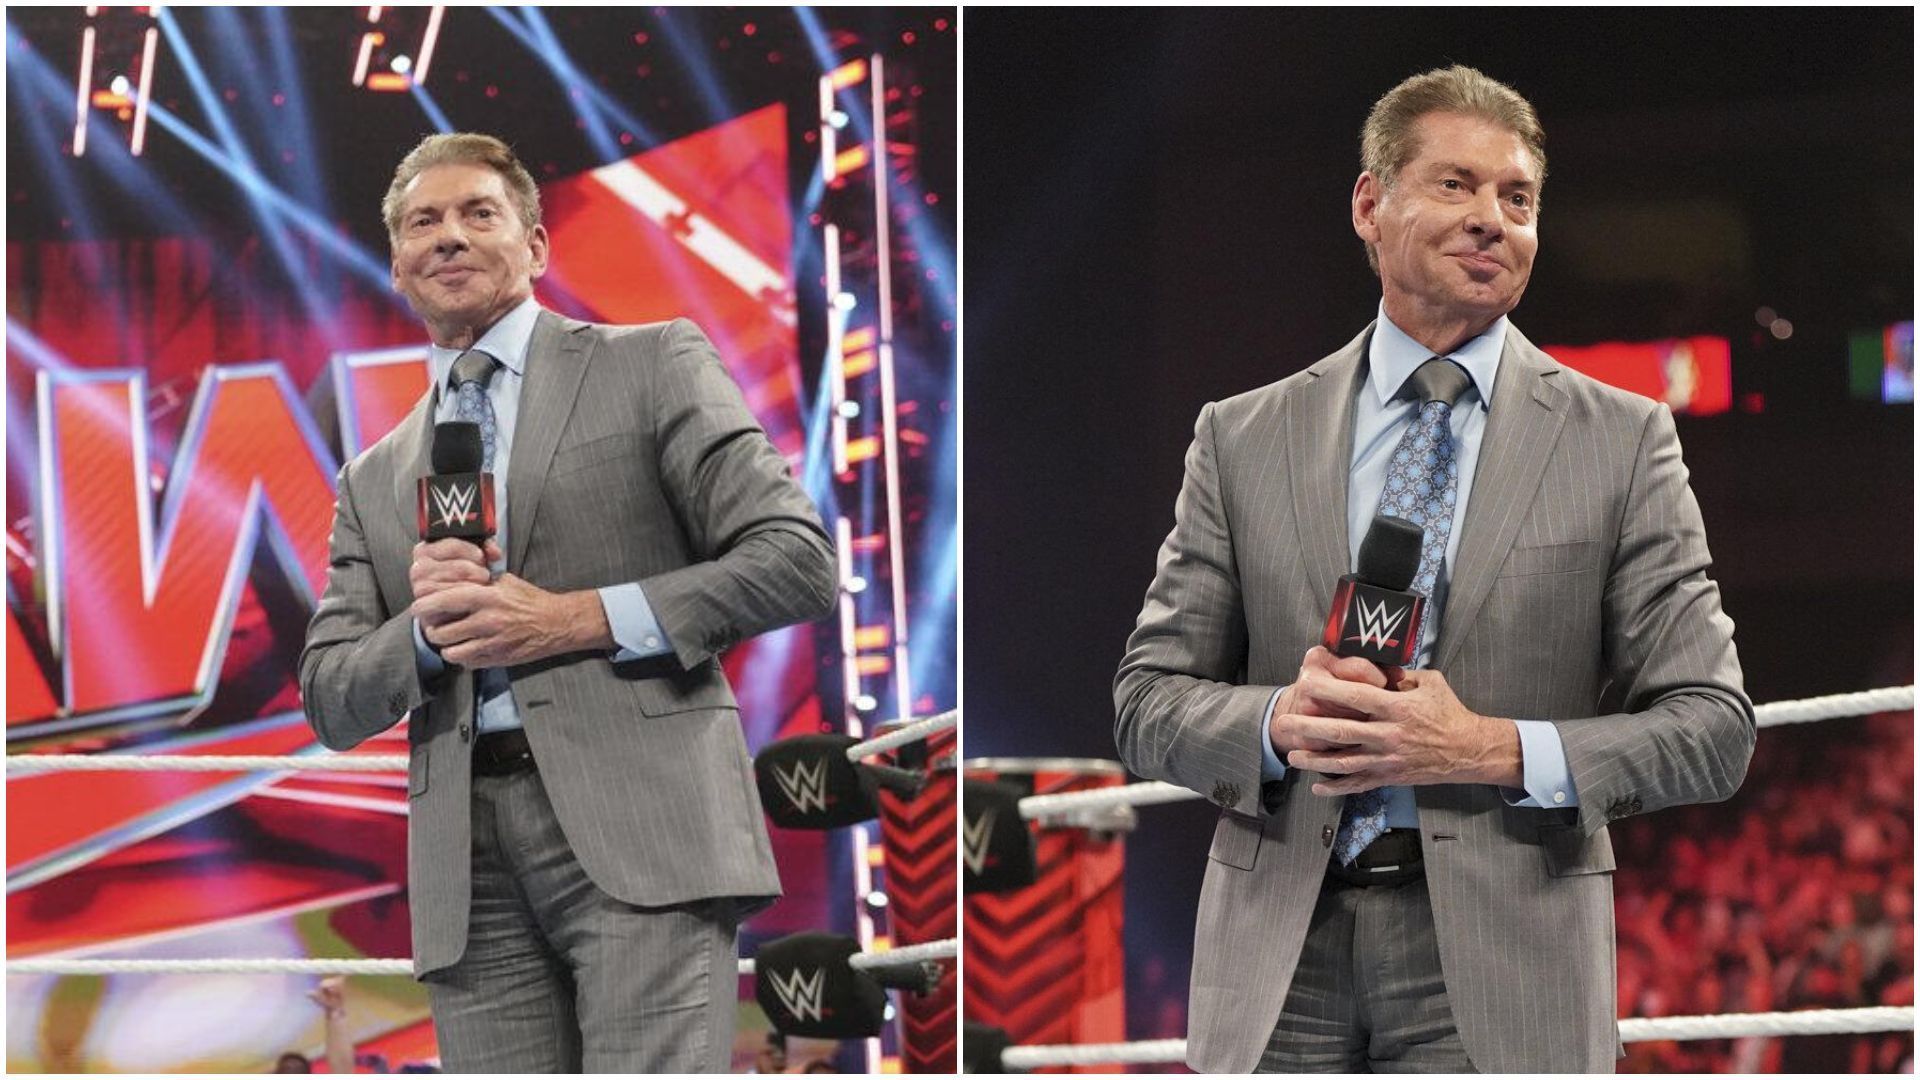 Vince McMahon is a former CEO of WWE. (Image source: WWE.com)